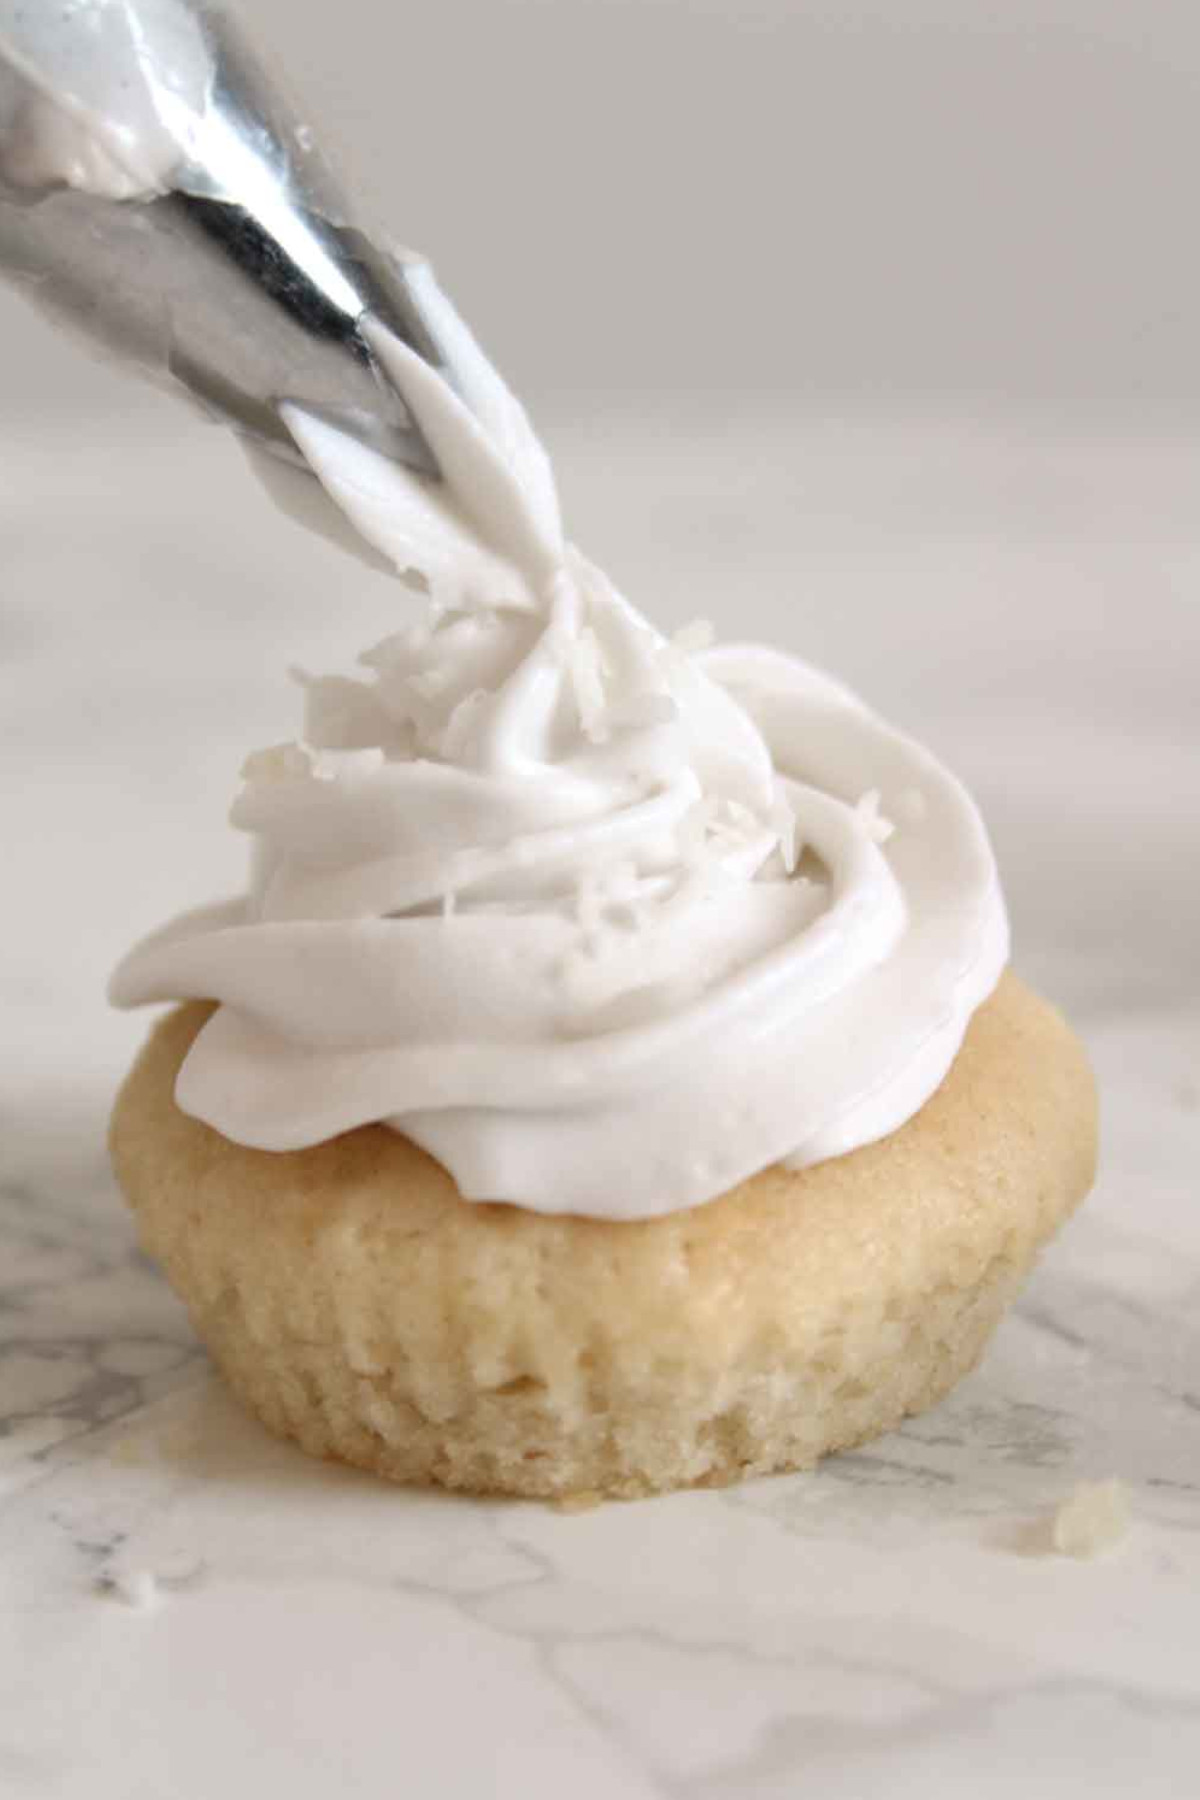 Coconut whipped cream being piped on a muffin.